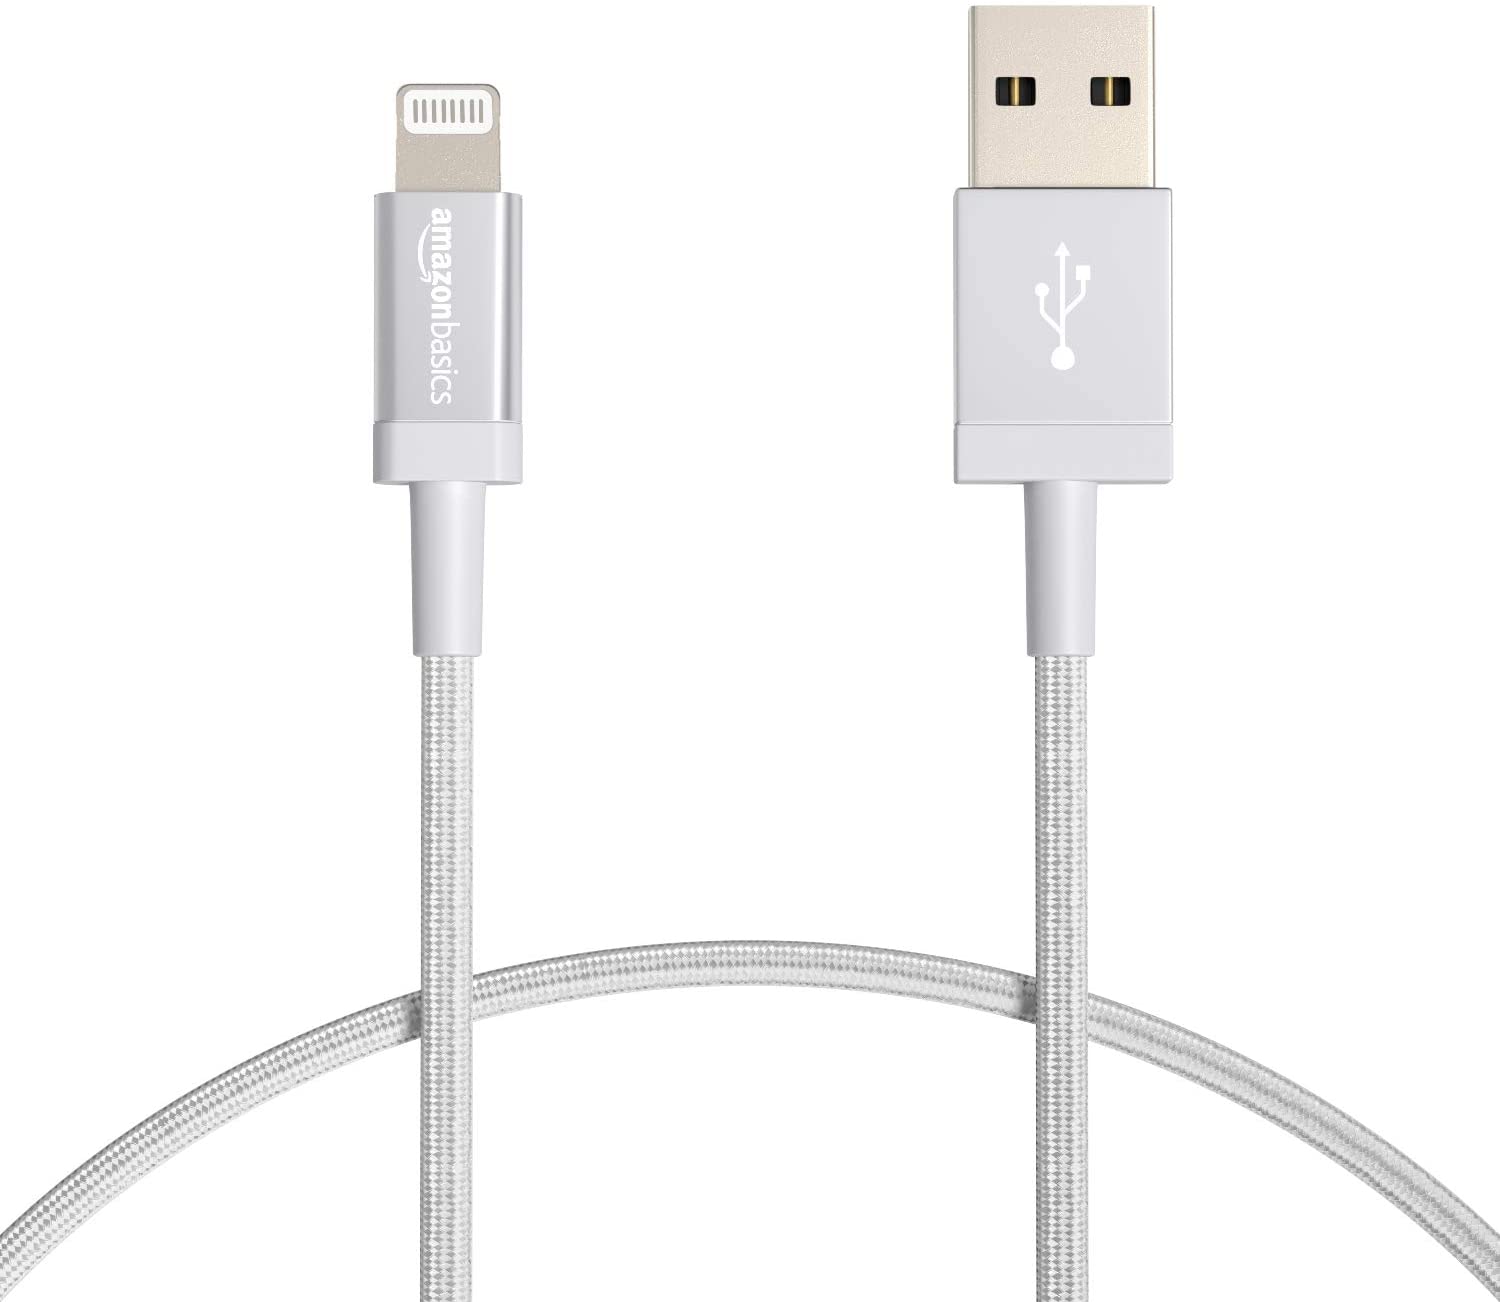 Lightning to USB Cable - MFi Certified Apple iPhone Charger, 1-Foot